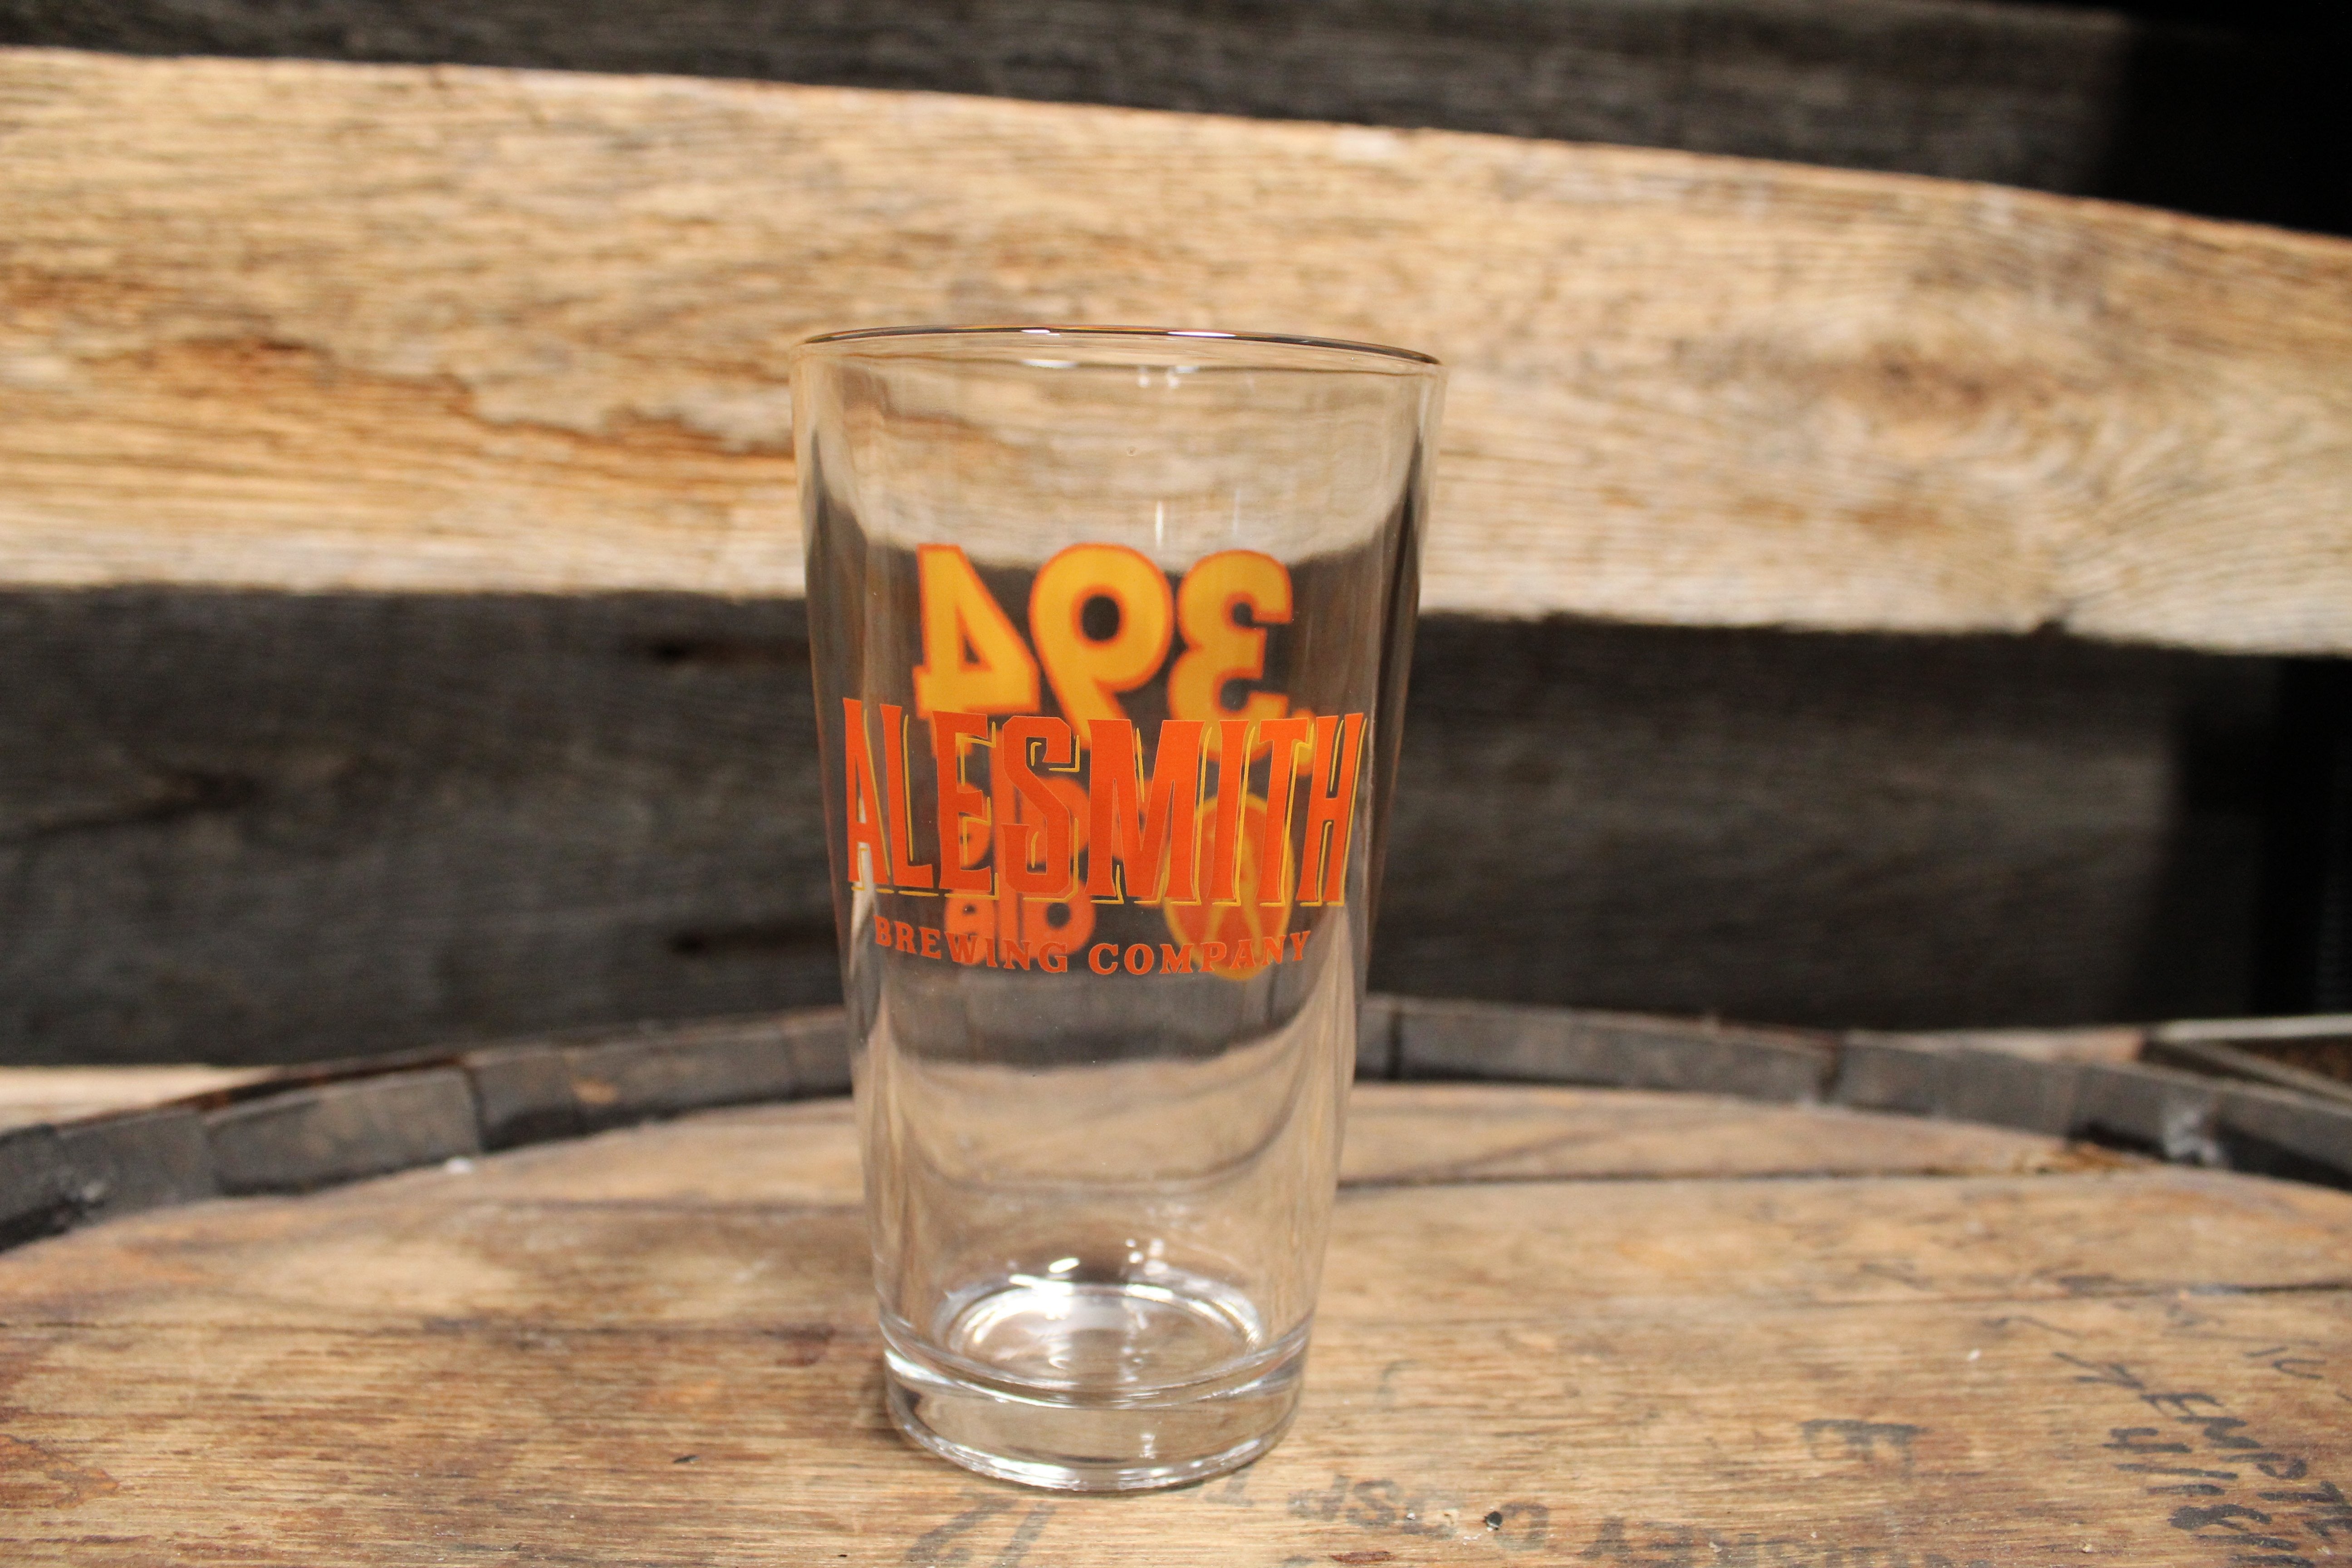 .394 Pint Glass - AleSmith Brewing Co.